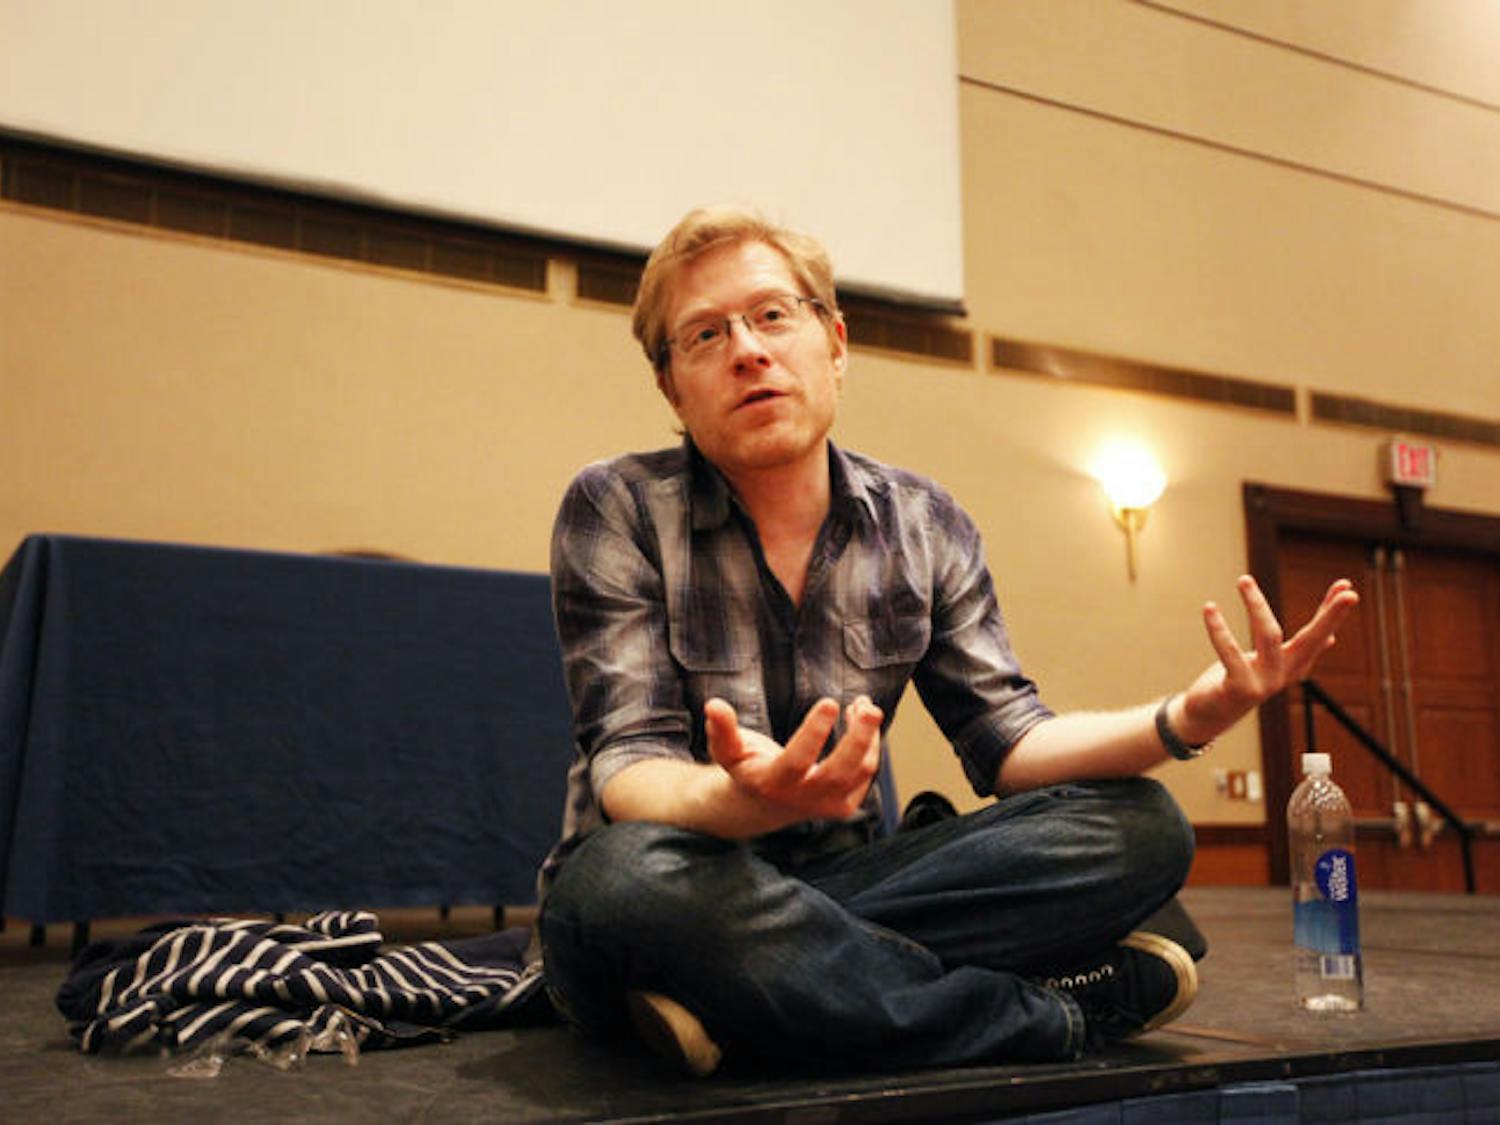 Actor Anthony Rapp, best known for his performance in the Broadway musical and film “Rent,” speaks to students in the Reitz Union Grand Ballroom on Thursday evening before his show.